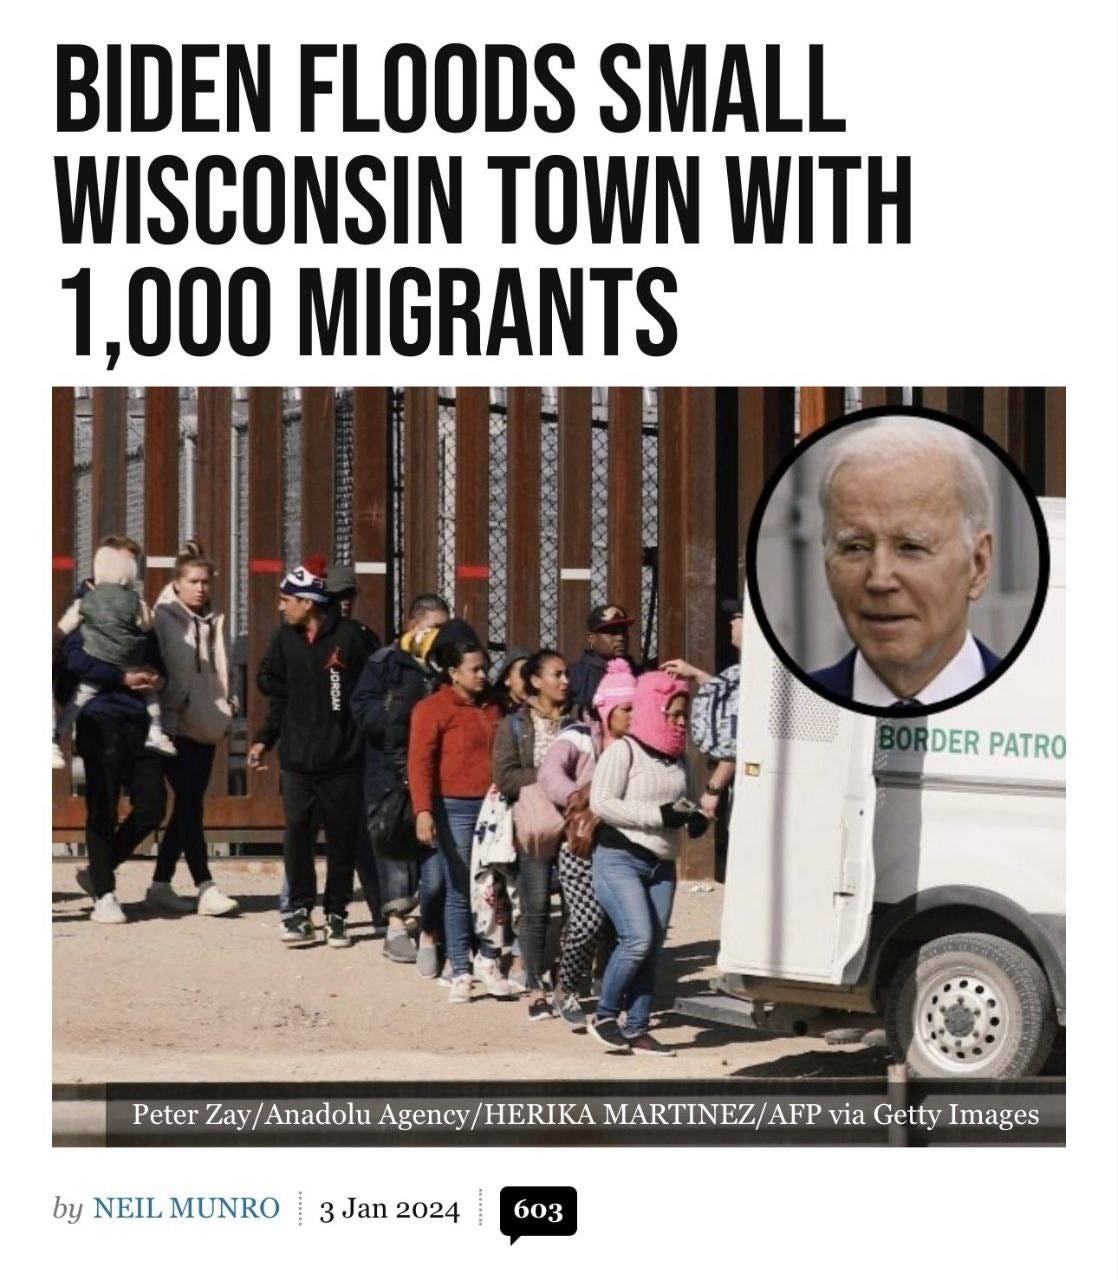 May be an image of 9 people and text that says 'BIDEN FLOODS SMALL WISCONSIN TOWN WITH 1,000 MIGRANTS @ BORDEPATR DER PATRO by NEIL MUNRO Peter Zay/ Anadolu P Agency /HERIKA MARTINEZ/AFP via Getty Images Jan 2024 603'